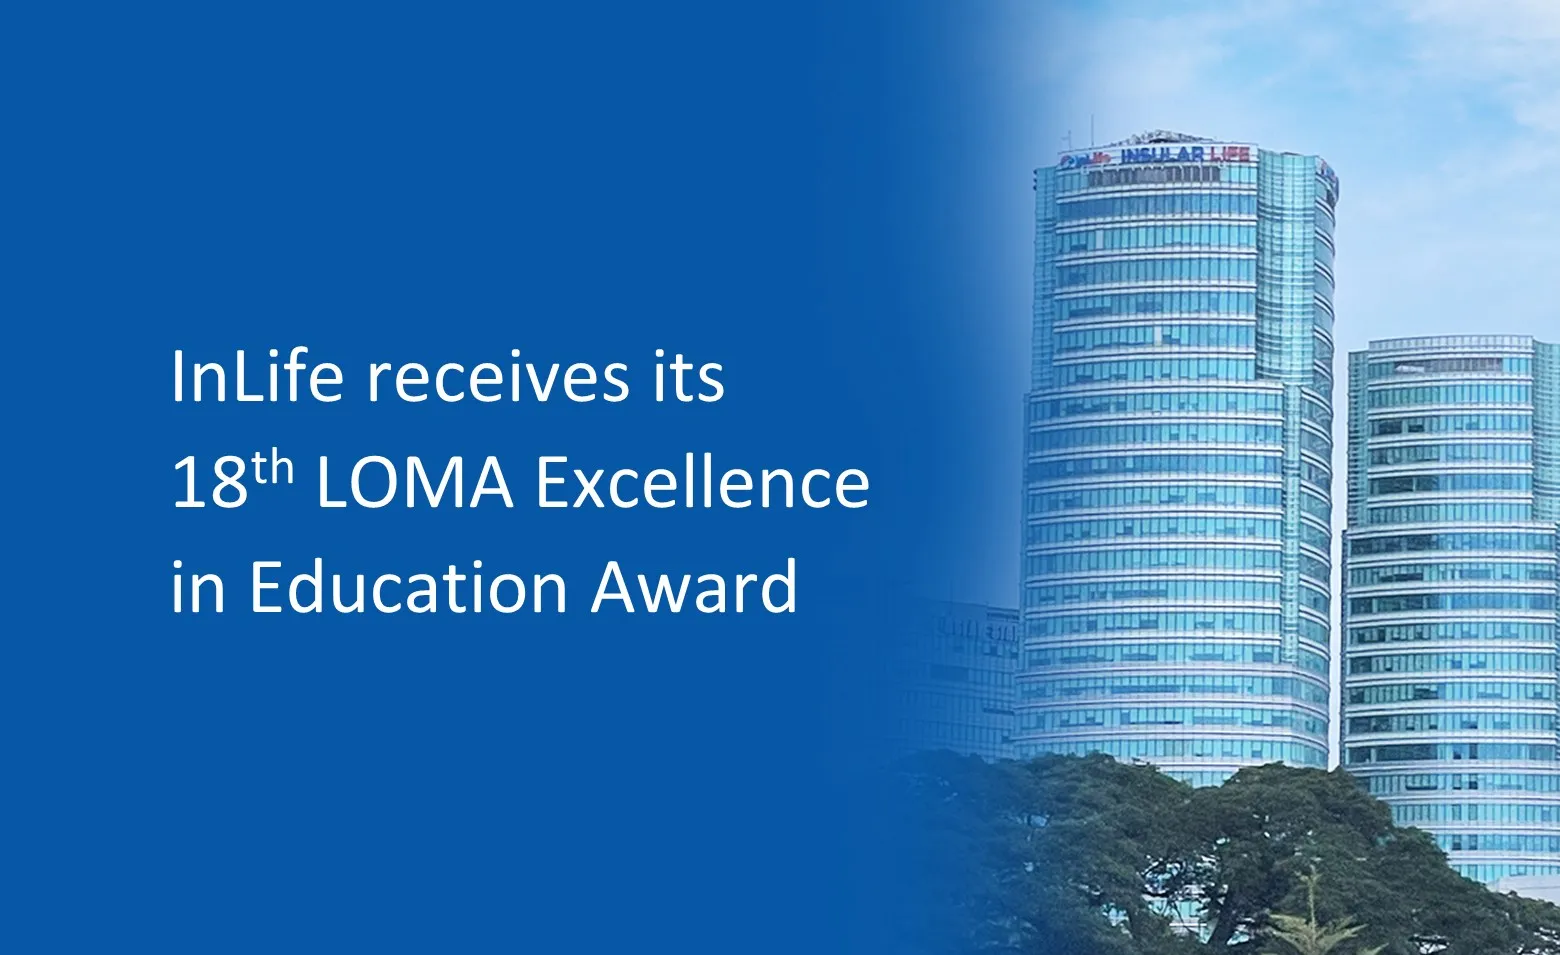 inlife-receives-its-18th-loma-excellence-in-education-award